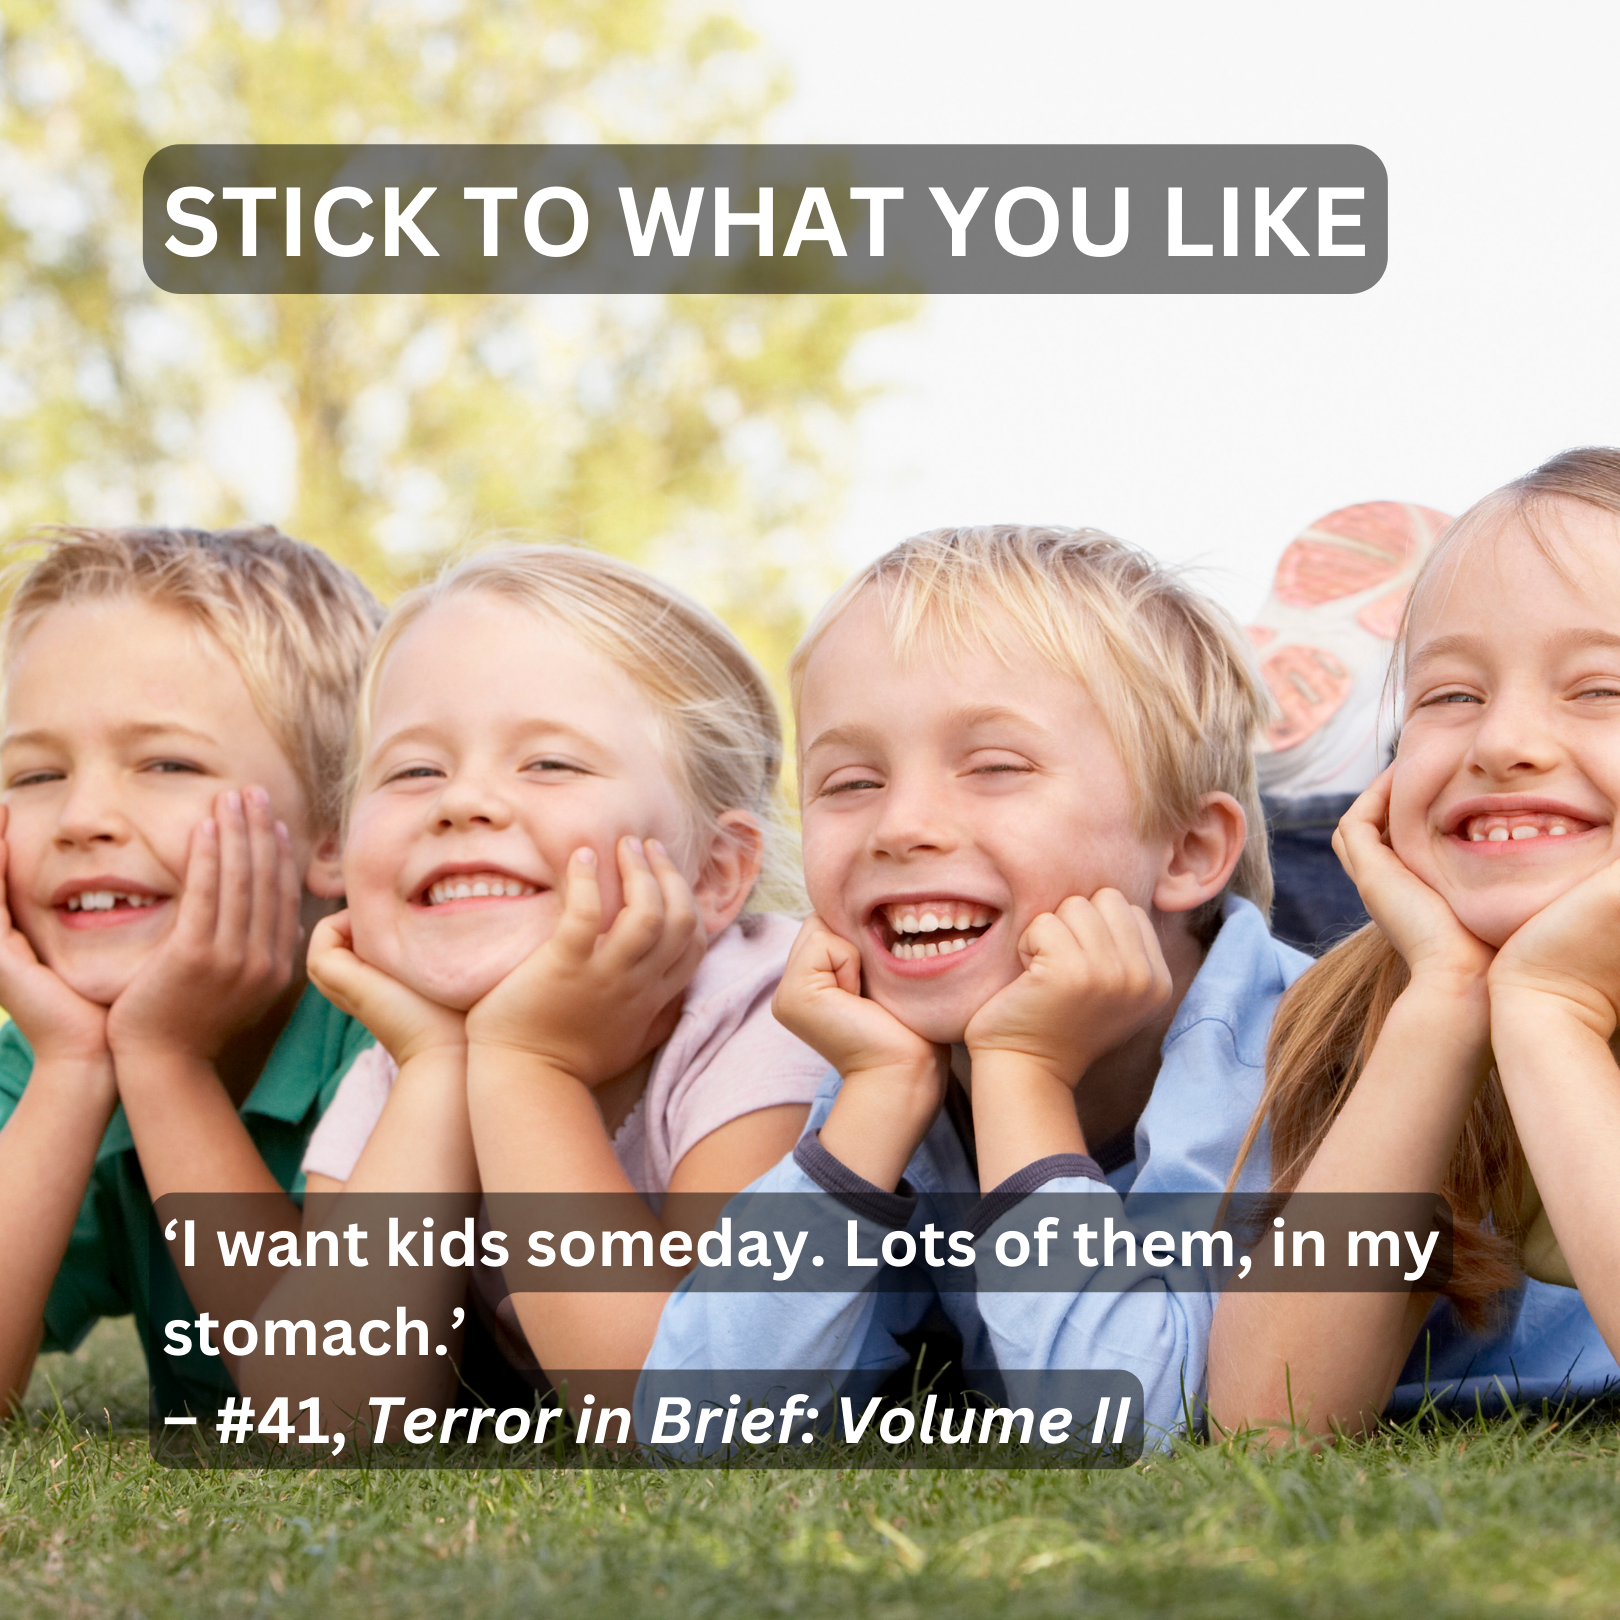 Stick to What You Like from Terror in Brief: Volume II